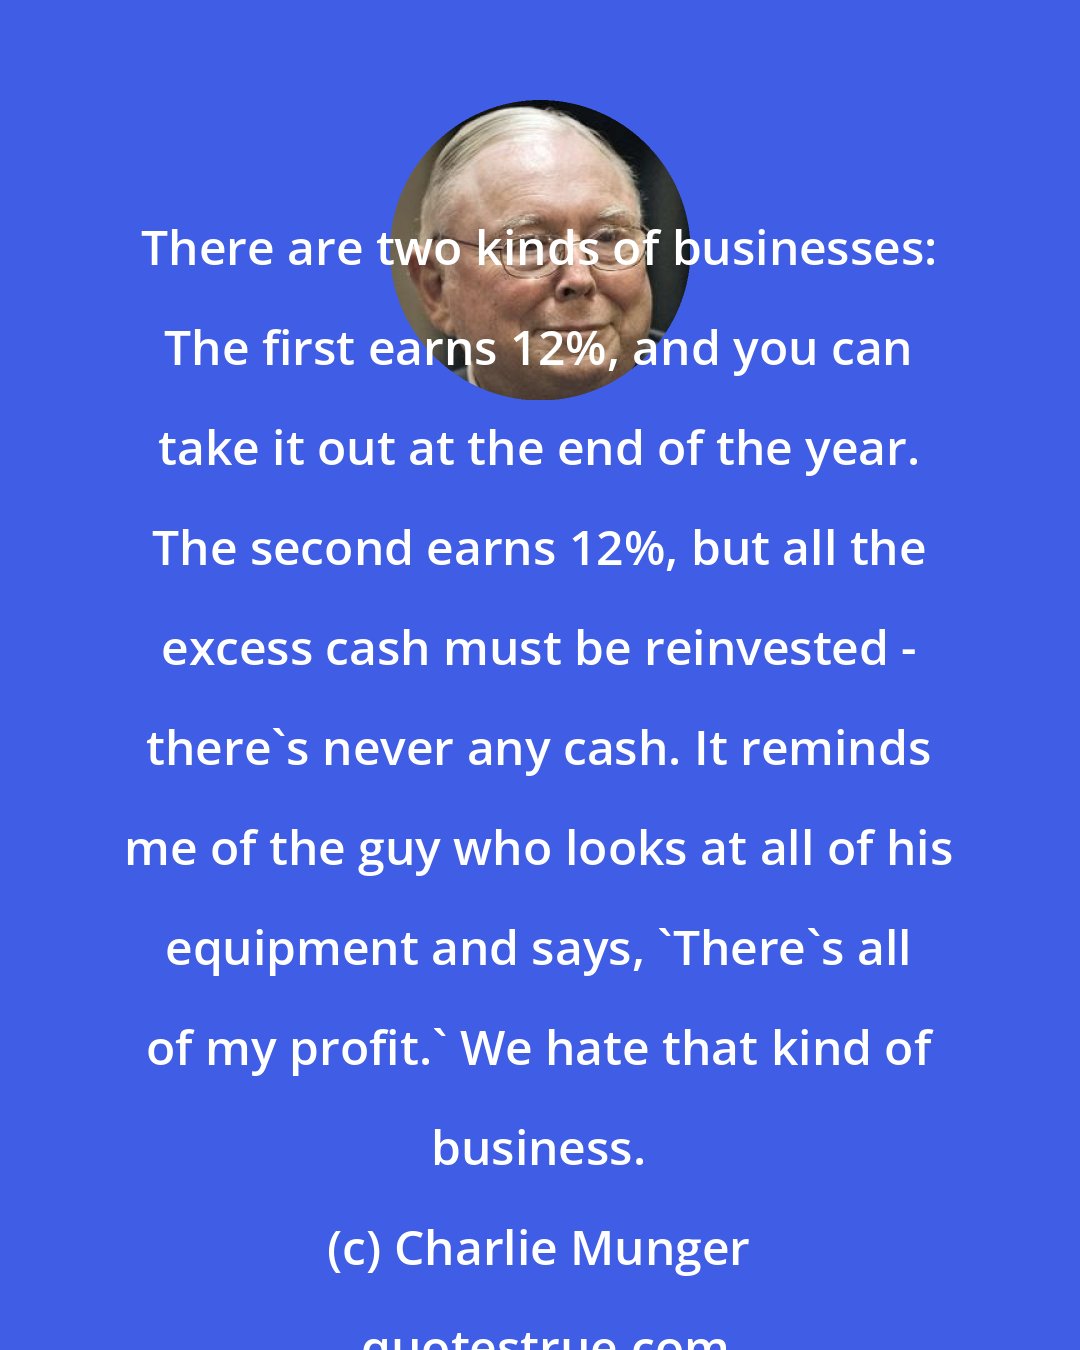 Charlie Munger: There are two kinds of businesses: The first earns 12%, and you can take it out at the end of the year. The second earns 12%, but all the excess cash must be reinvested - there's never any cash. It reminds me of the guy who looks at all of his equipment and says, 'There's all of my profit.' We hate that kind of business.